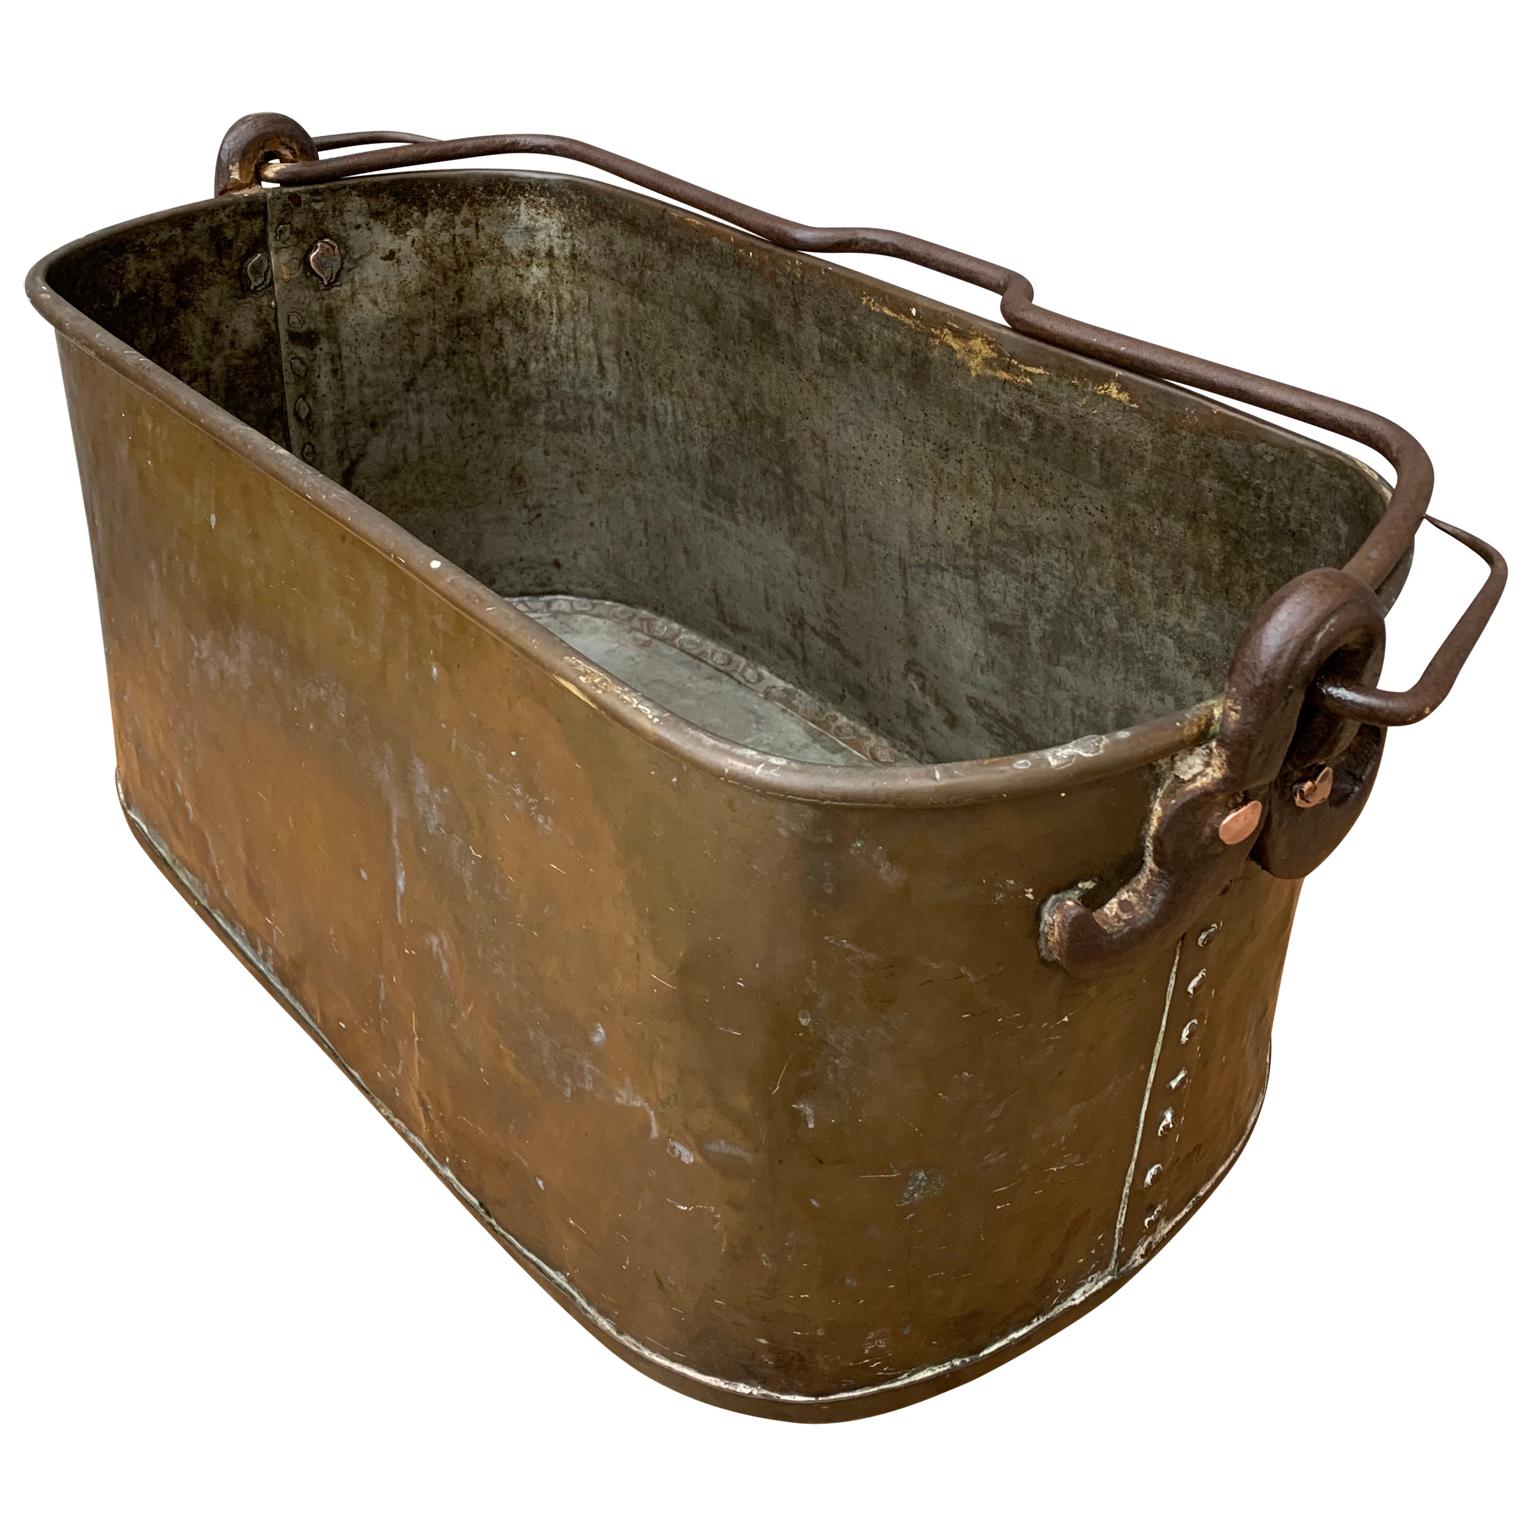 An 18th century copper and forged iron big bucket. All hand hammered with handmade copper rivets and hand forged iron handle. Most probably used for bringing and keeping wood by the chimney.